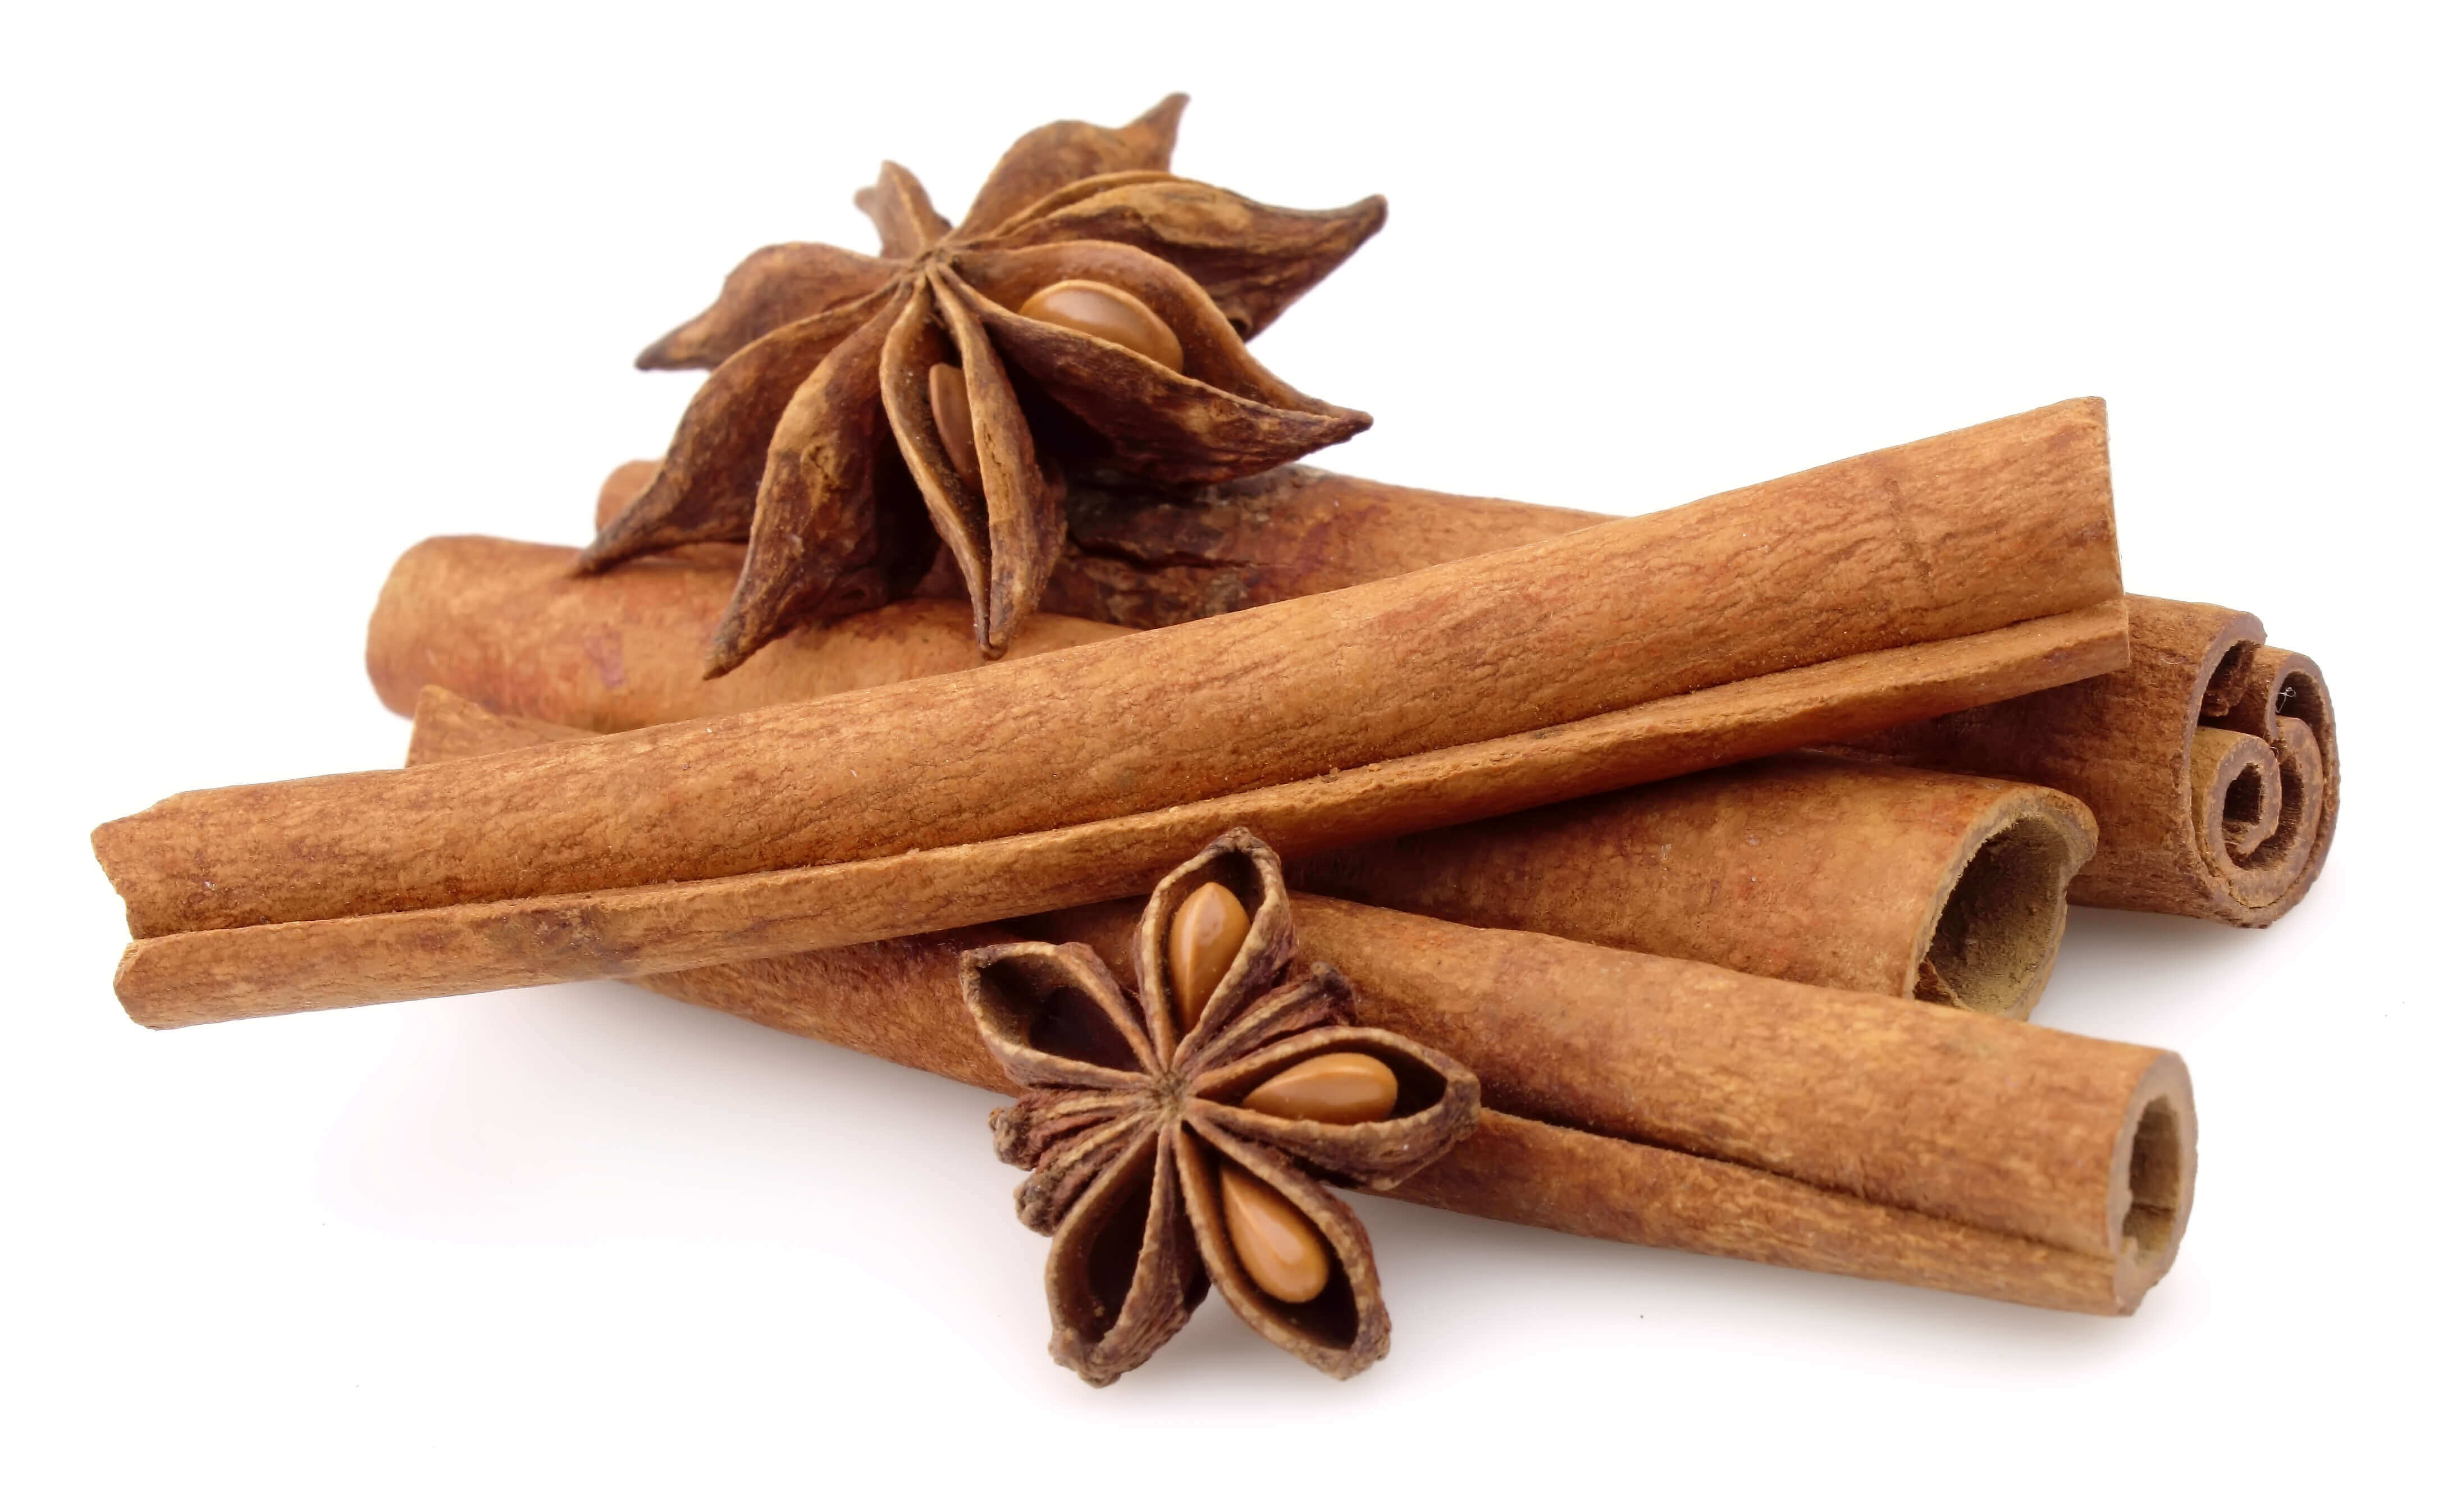 BMV Fragrances offers Cinnamon Essential Oil with 100% Pure & Natural Cinnamon Bark Absolute that has broad applications in flavours and odoured candles.